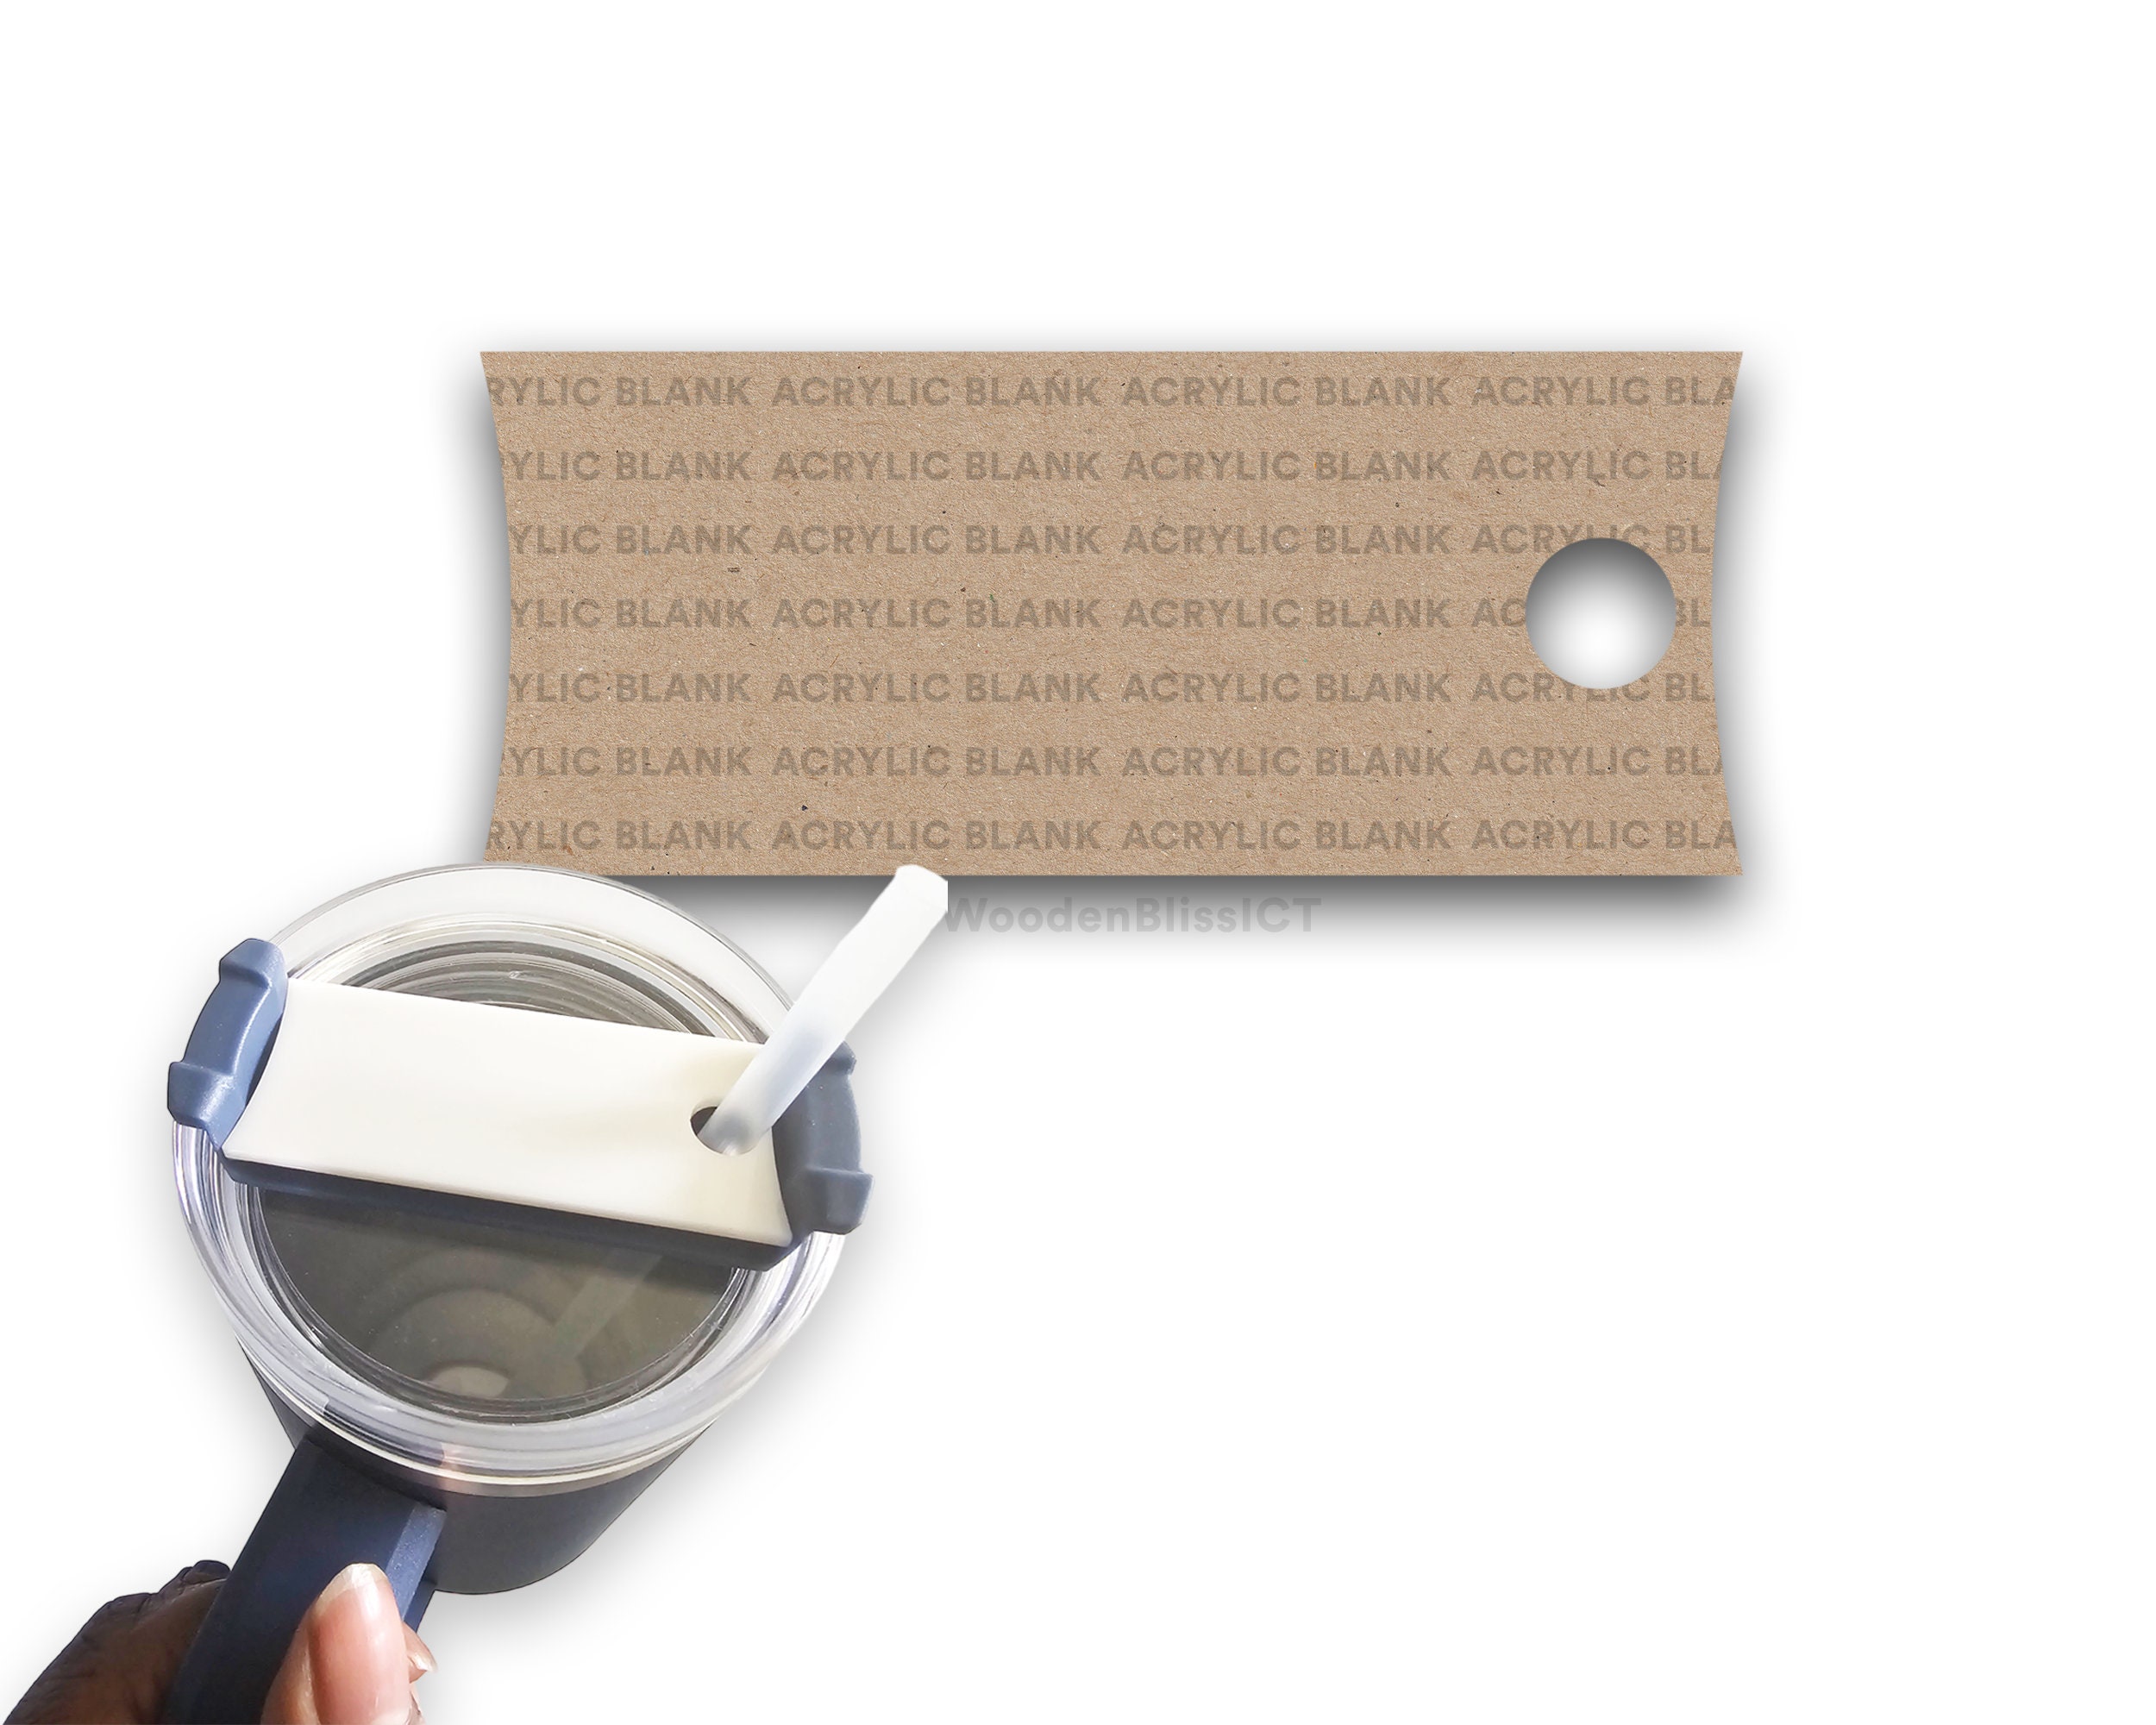 Blank Name Tape Labels and Laundry Marking Pen